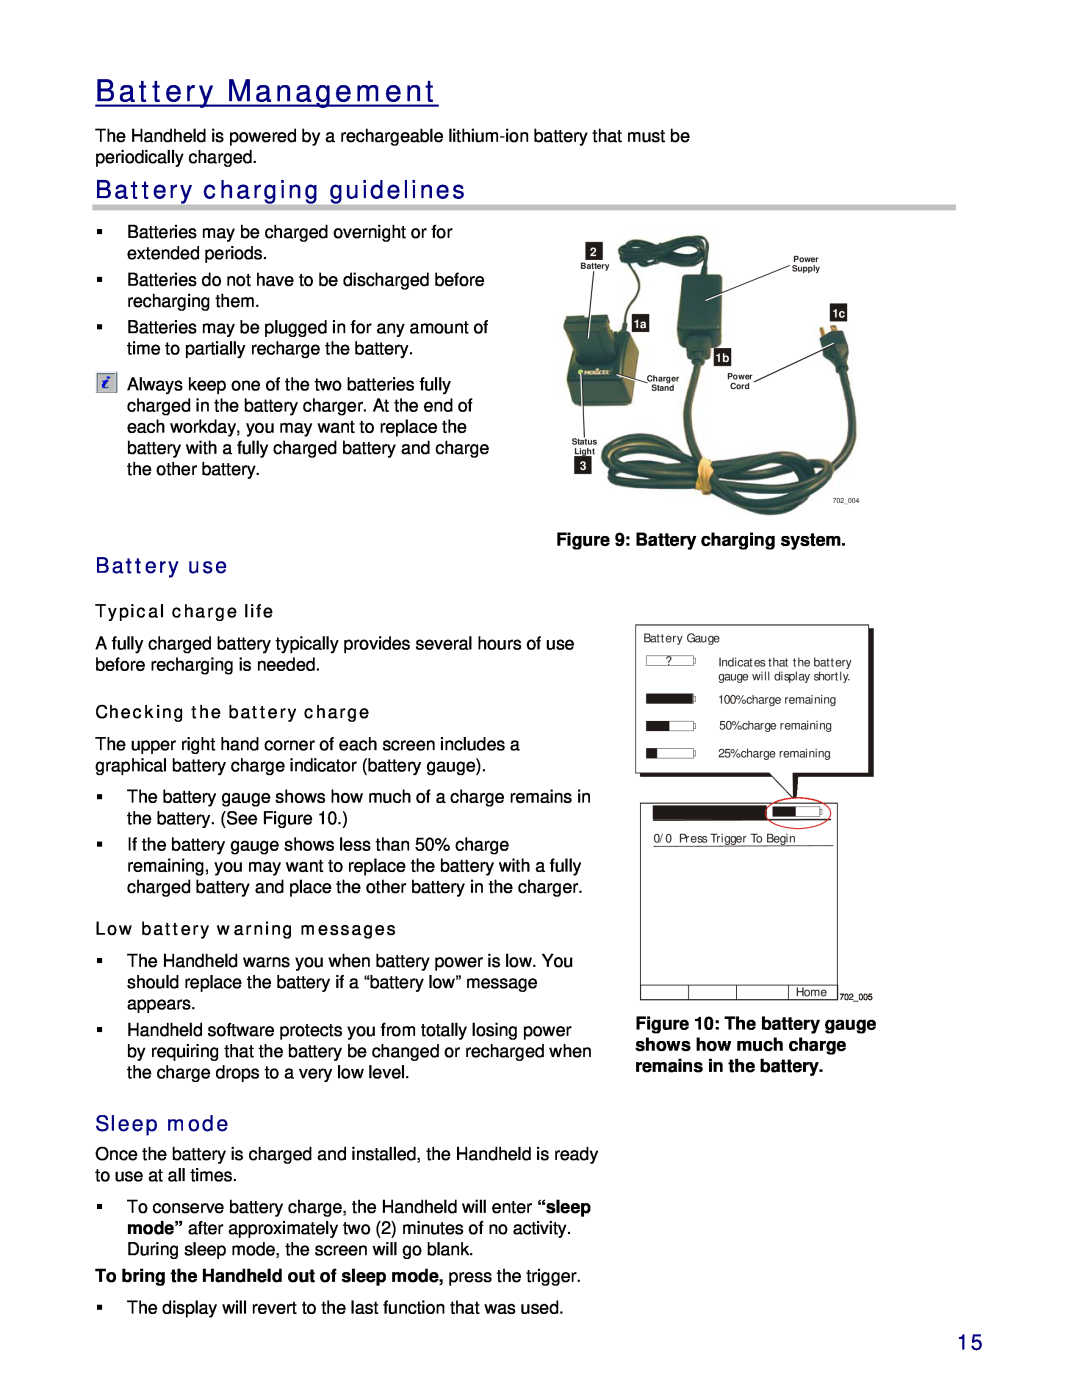 3M 803 owner manual Battery Management, Battery charging guidelines, Battery use, Sleep mode, Battery charging system 